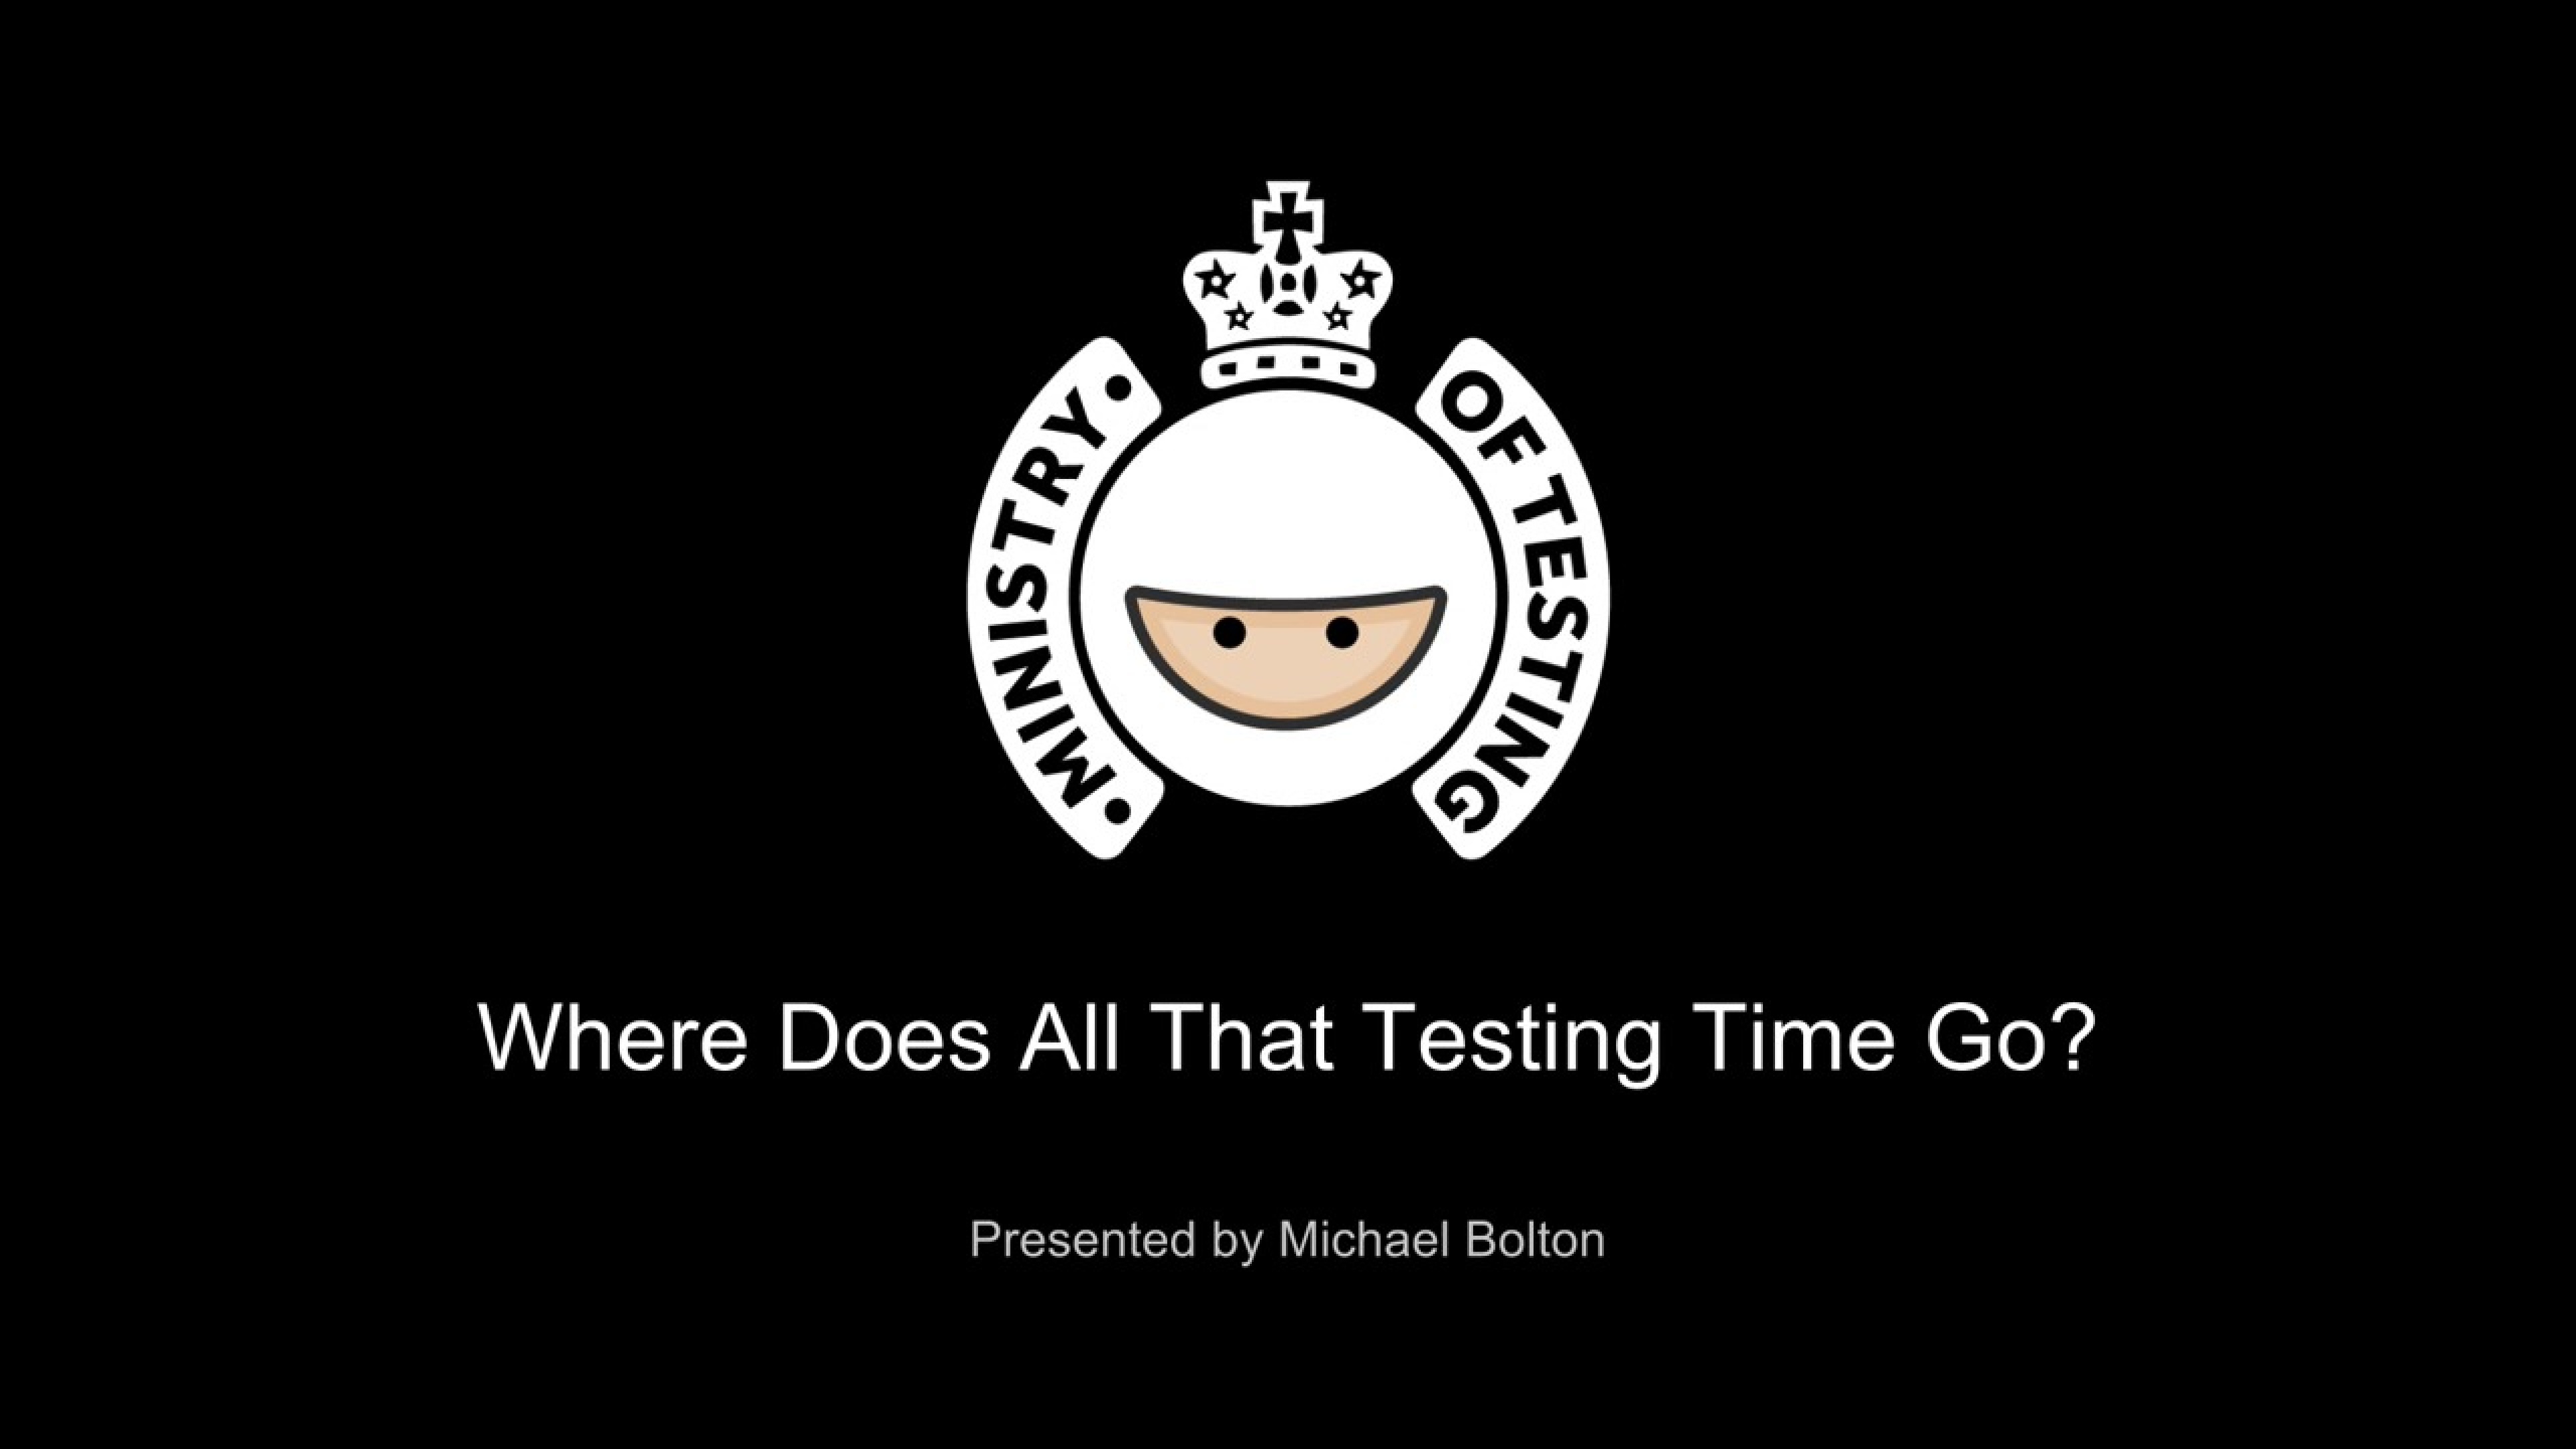 Where Does All That Testing Time Go? with Michael Bolton